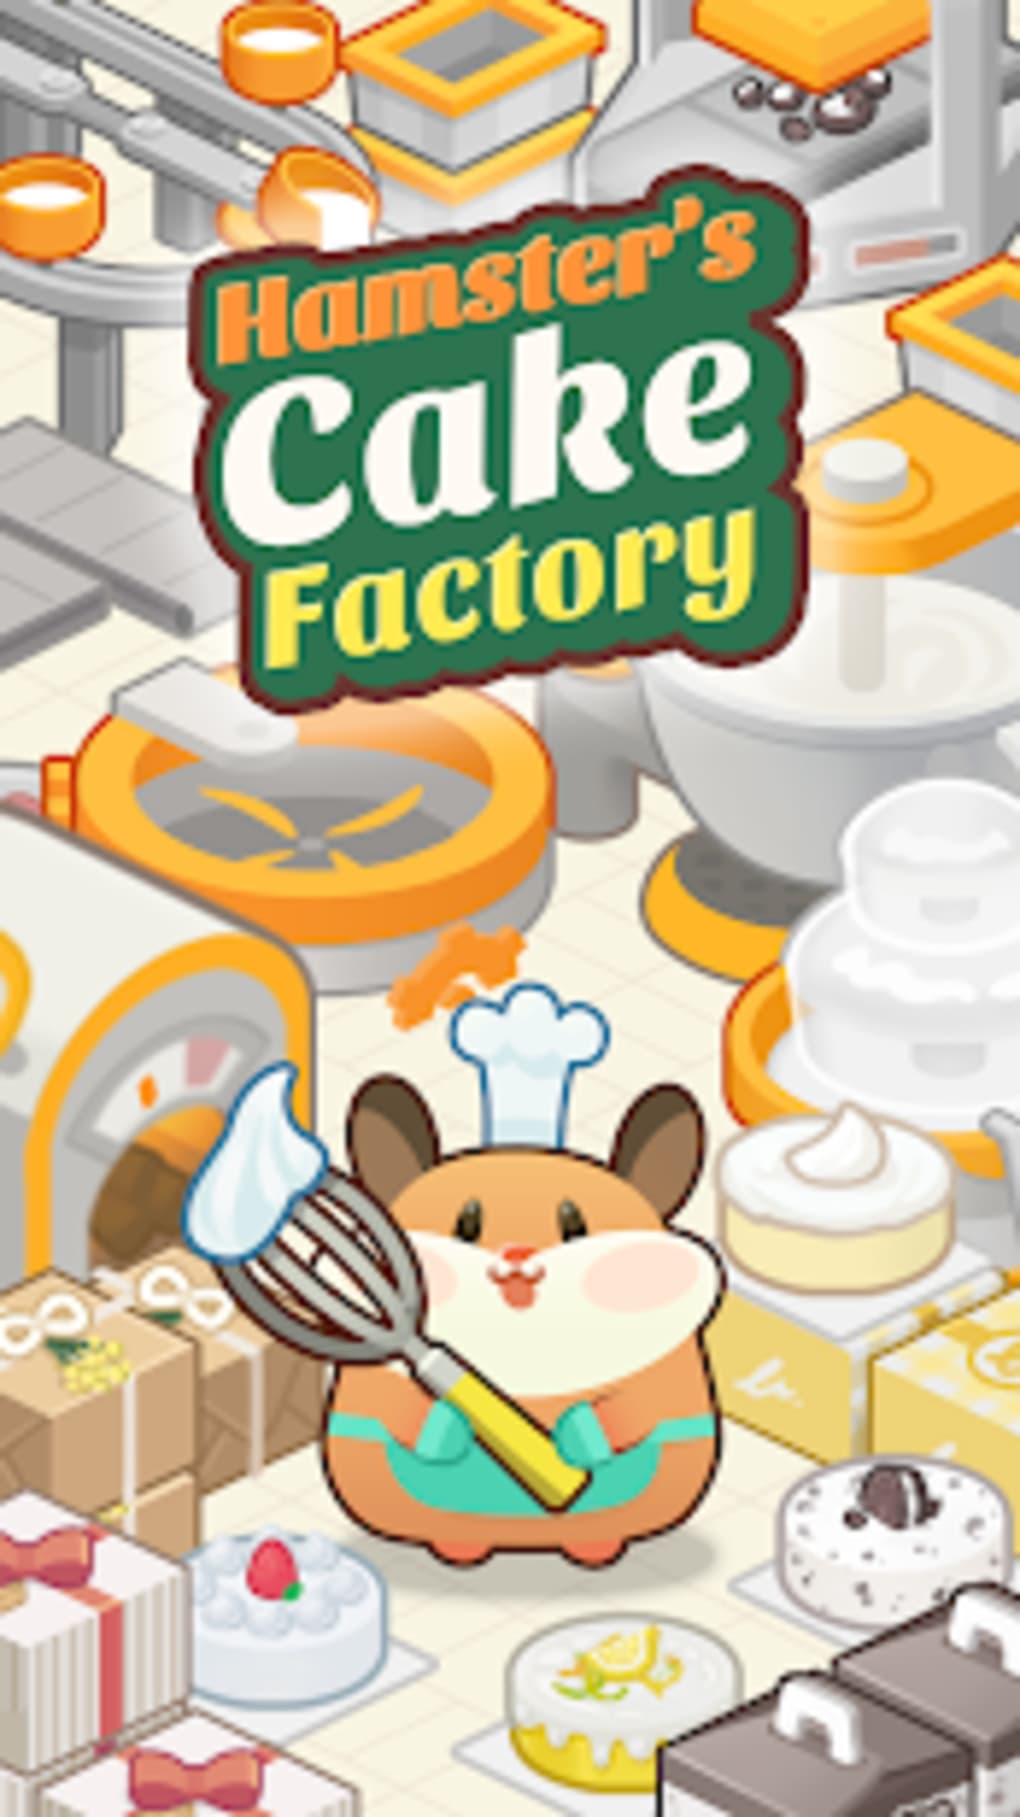 Tycoon Hamster Game - idle cheesecake para Android - Download